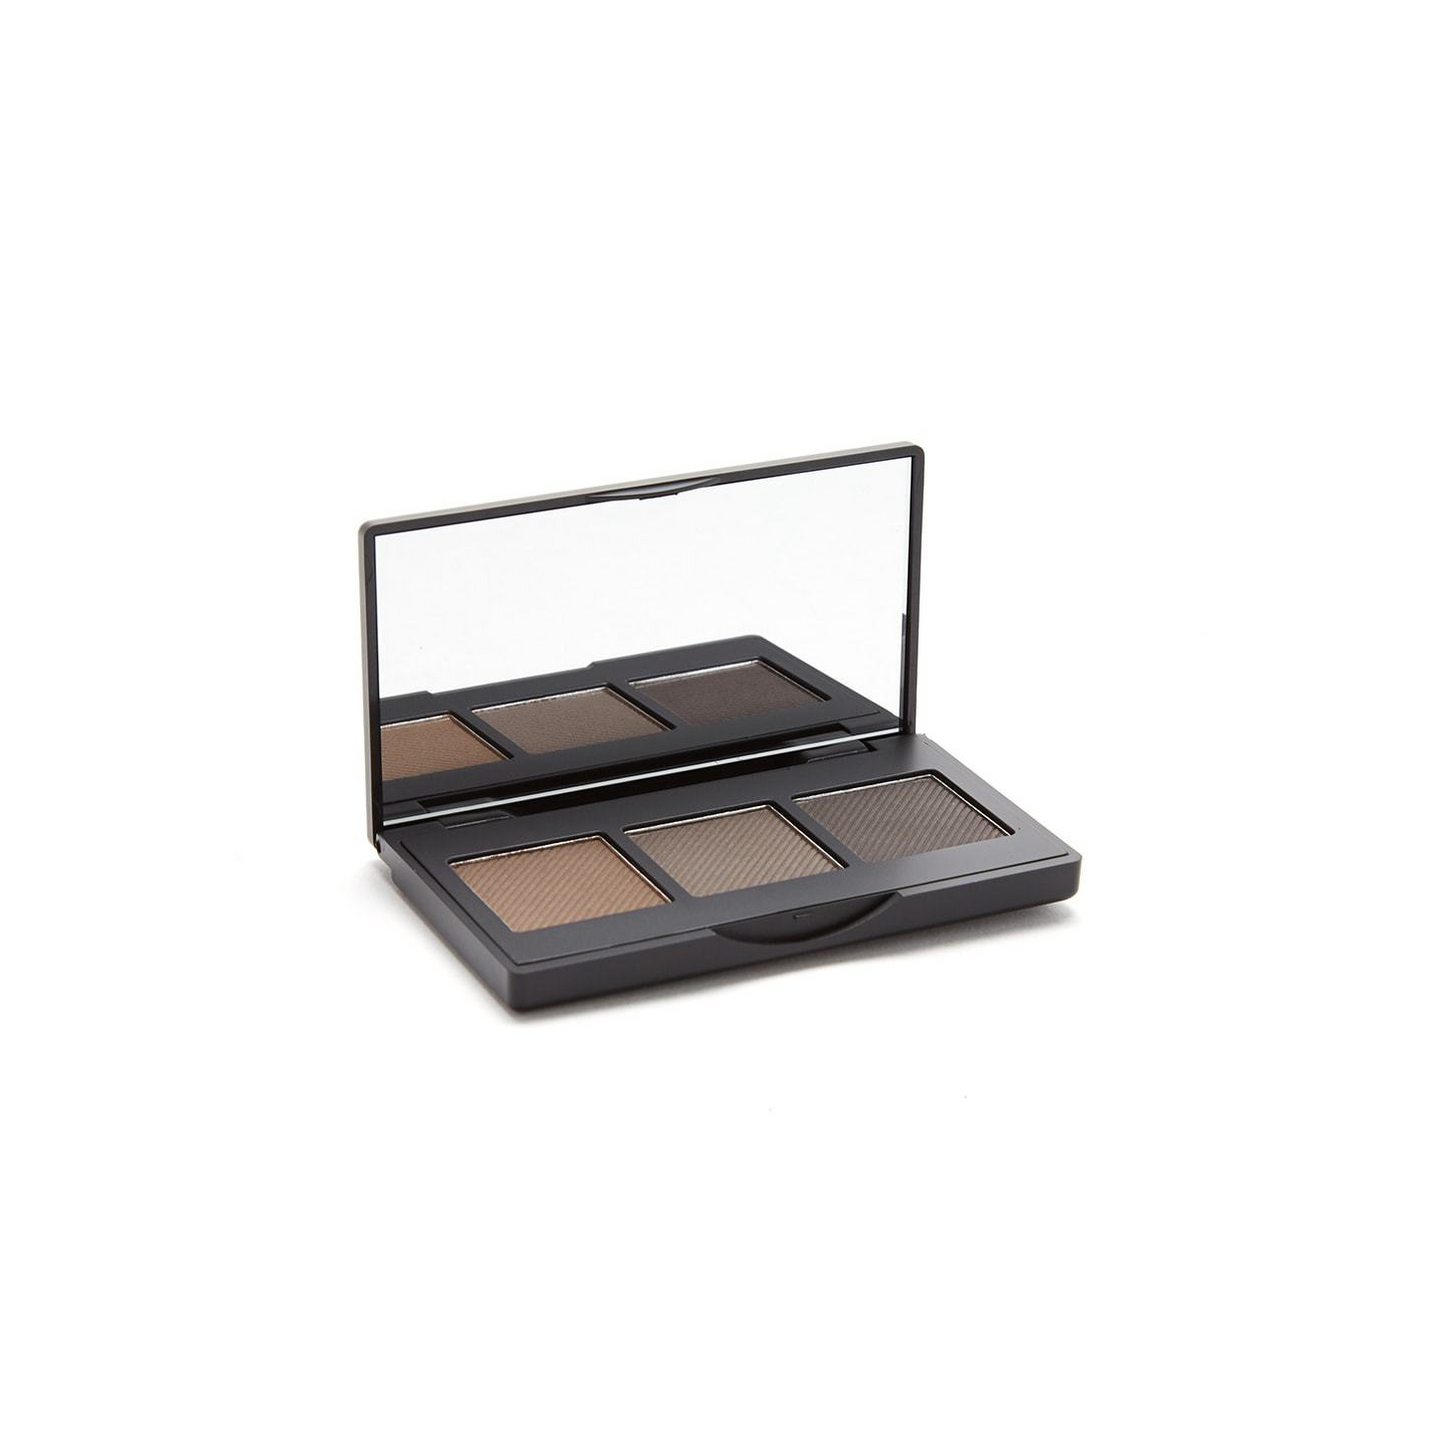 Convertible Brow Palette